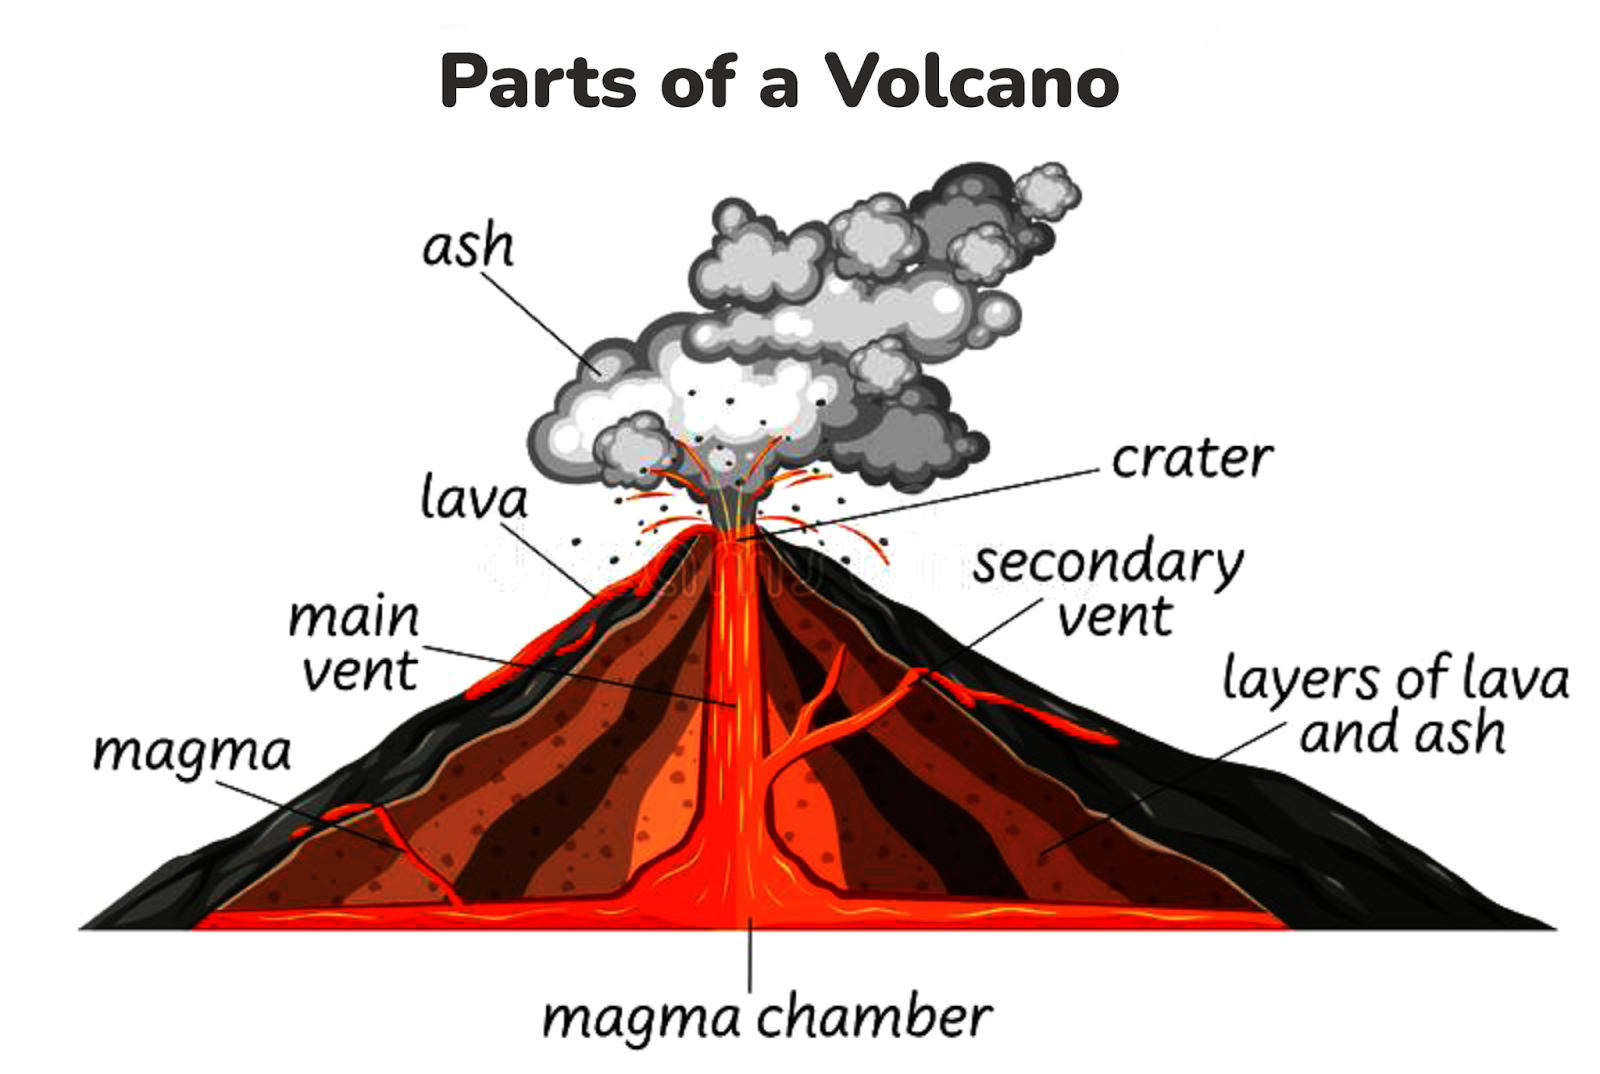 Parts of a Volcanic Eruptions
